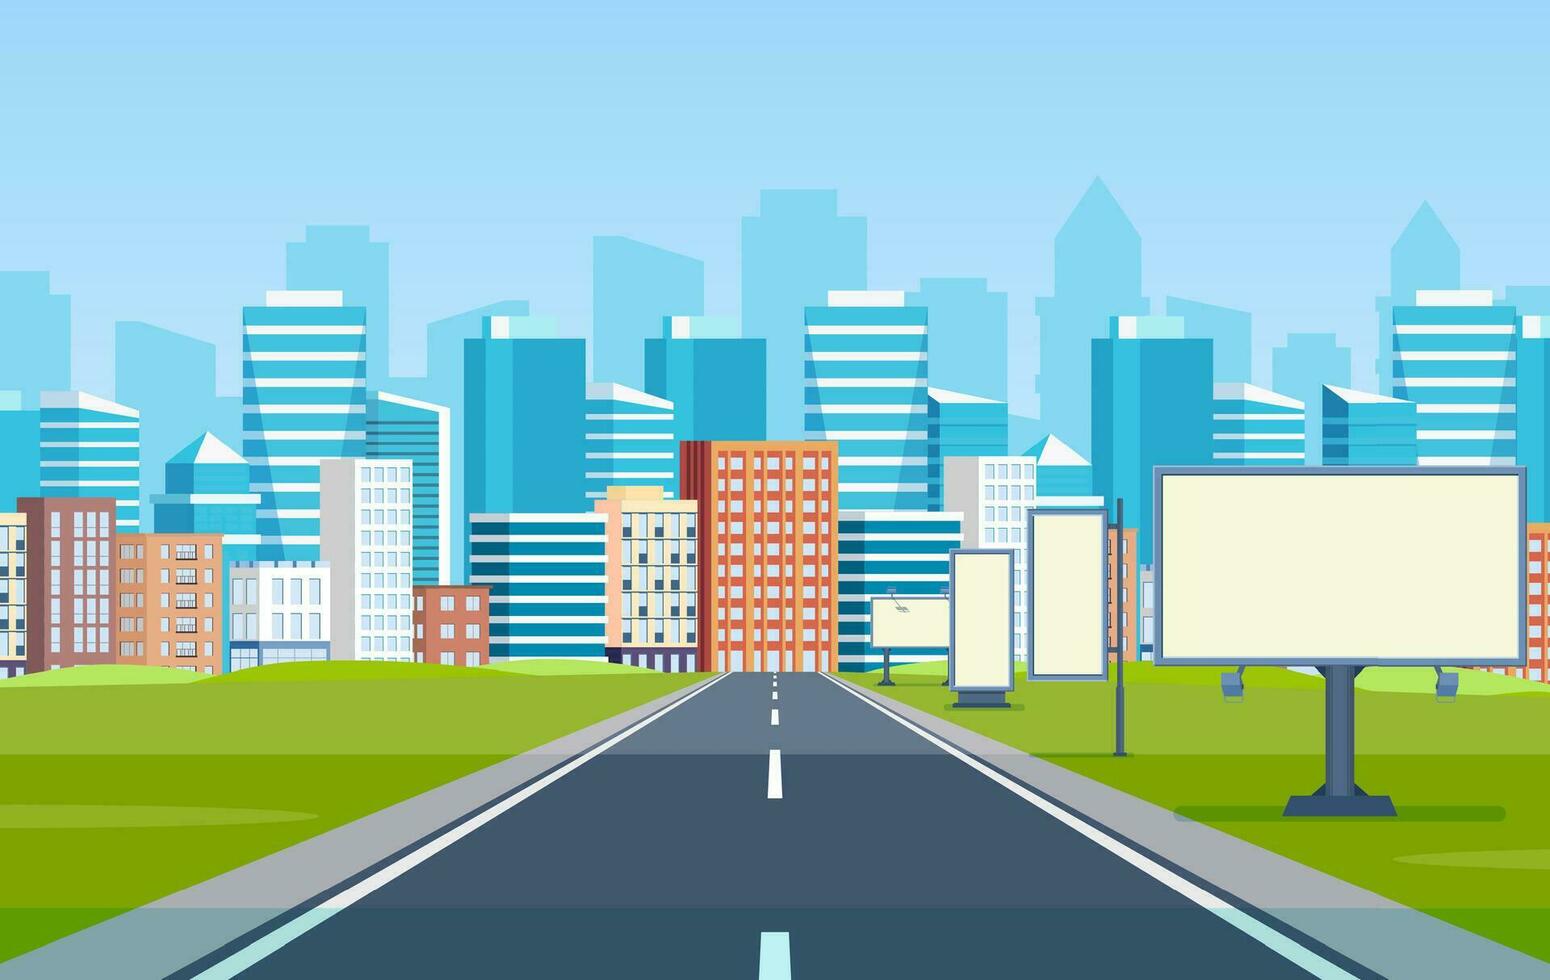 Road way to city buildings on horizon. highway cityscape, modern big skyscrapers town far away ahead, Road to city with billboards. Vector illustration in flat style